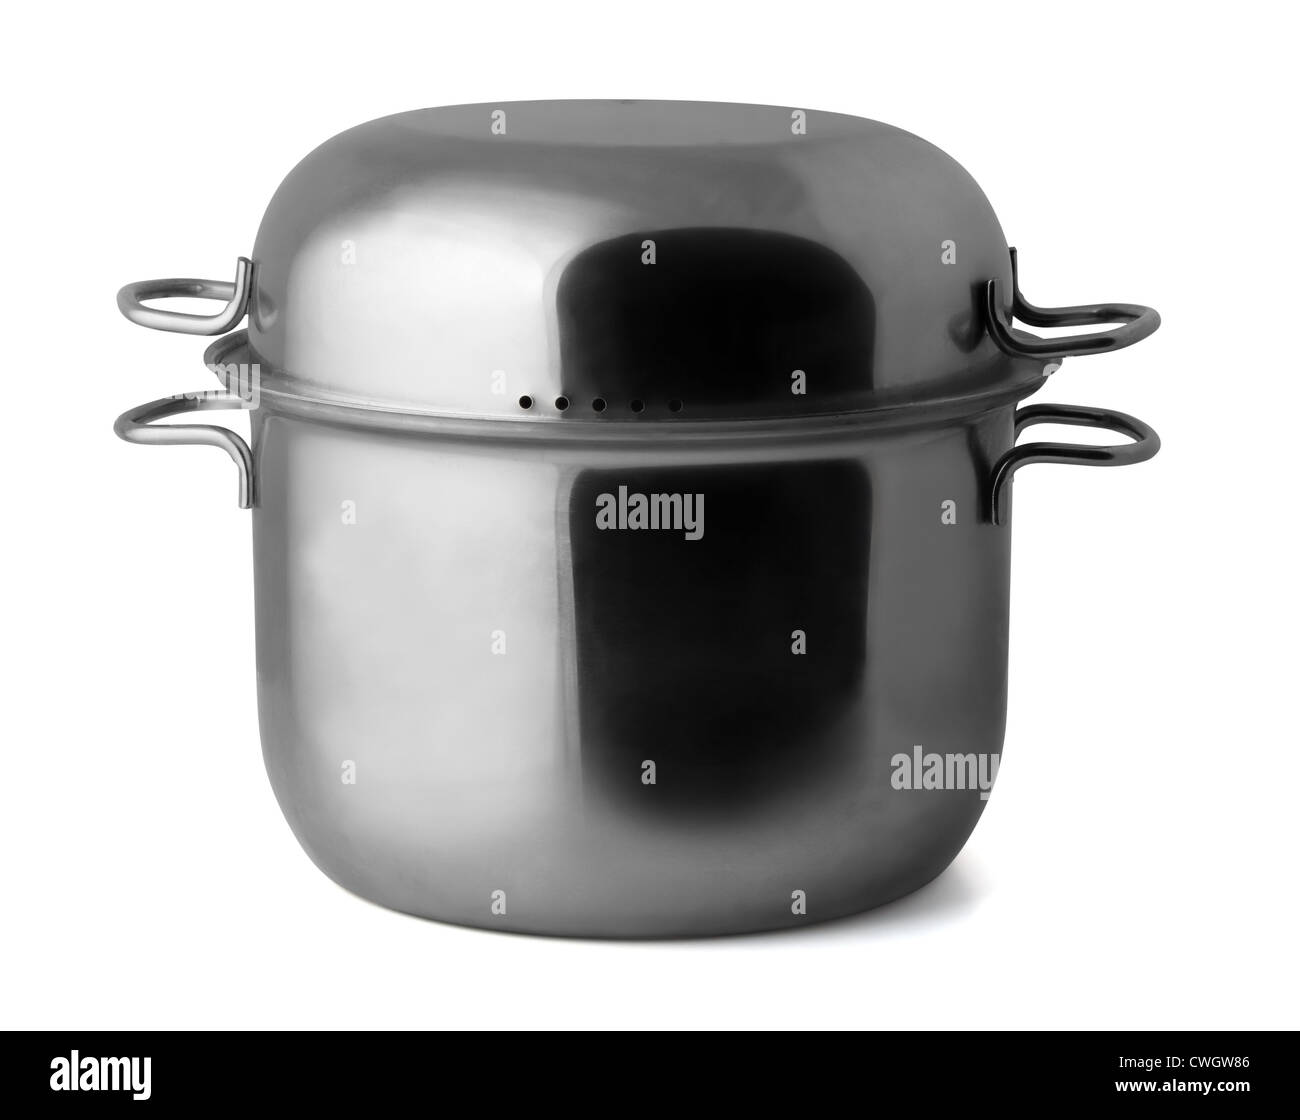 https://c8.alamy.com/comp/CWGW86/stainless-steel-pressure-cooker-isolated-on-white-CWGW86.jpg